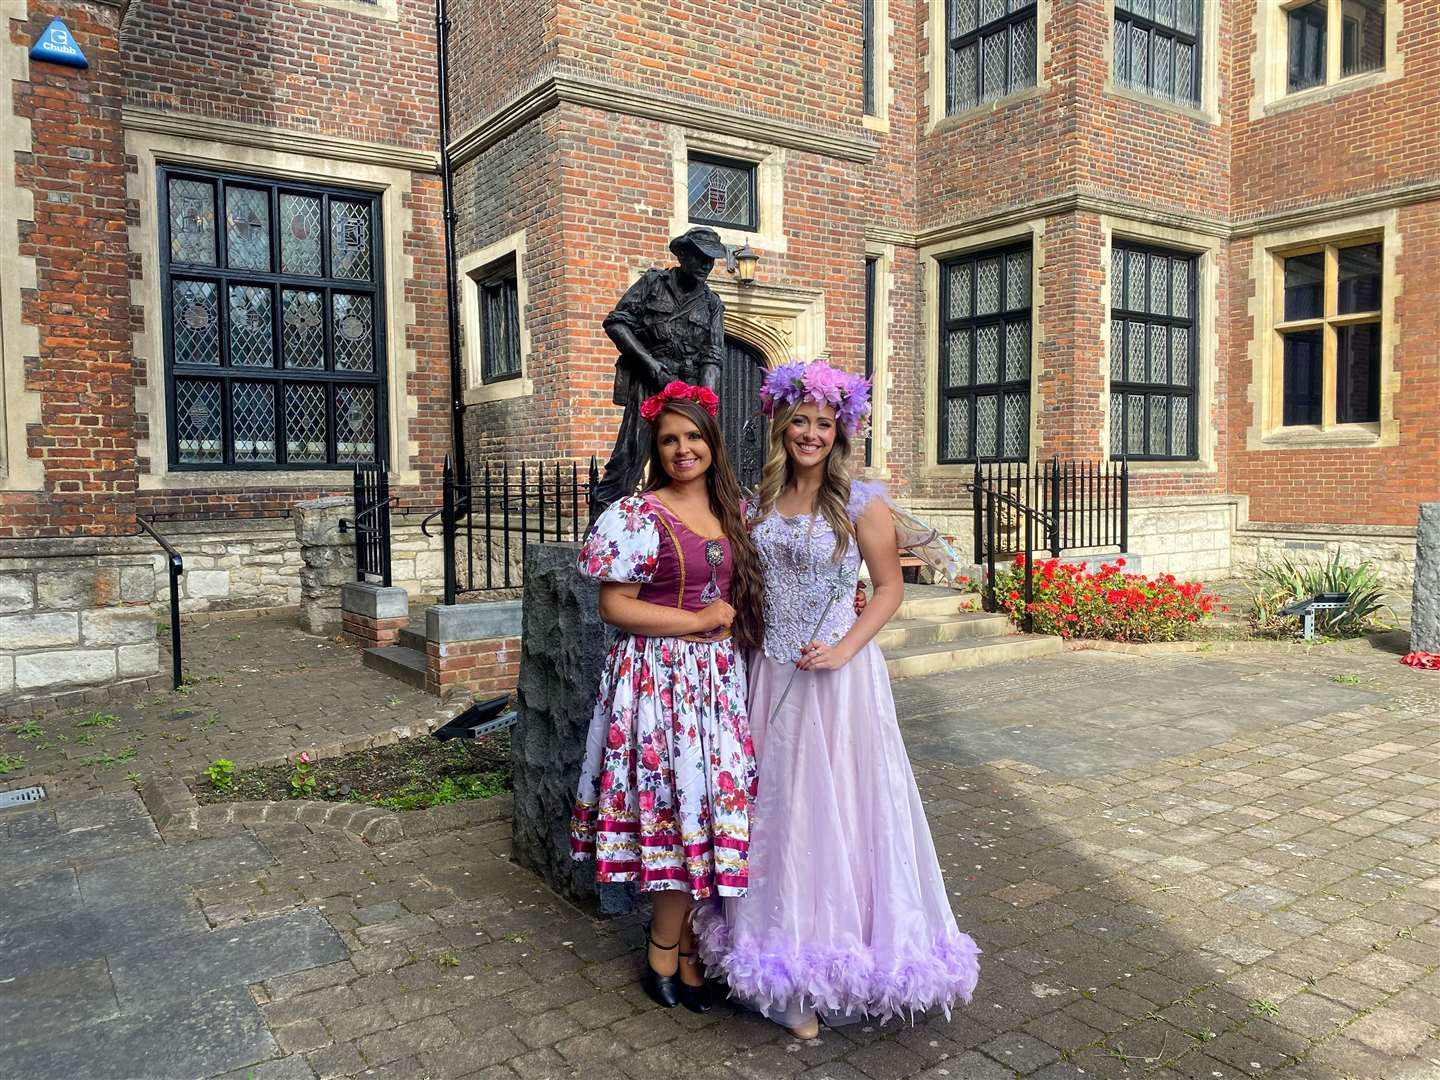 Lucy Edge as Aurora (left) and Hayley Johnston as Fairy Flora (right) outside the Maidstone Museum. Picture: Sam Lawrie